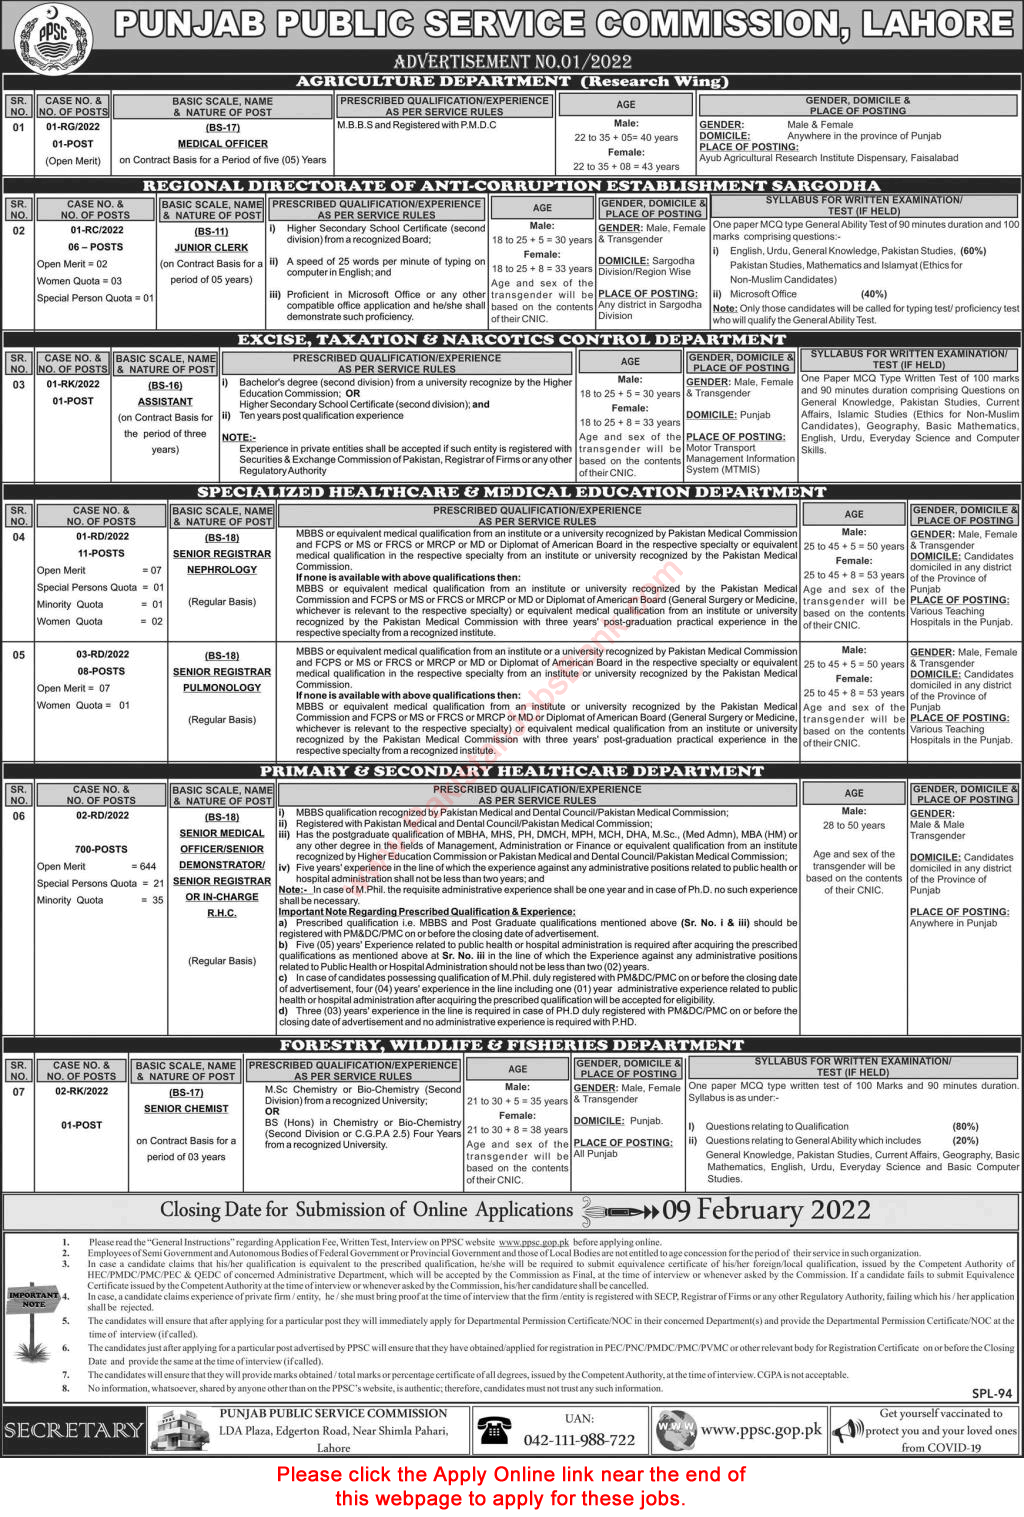 PPSC Jobs 2022 January Apply Online Consolidated Advertisement No 12/2022 Latest